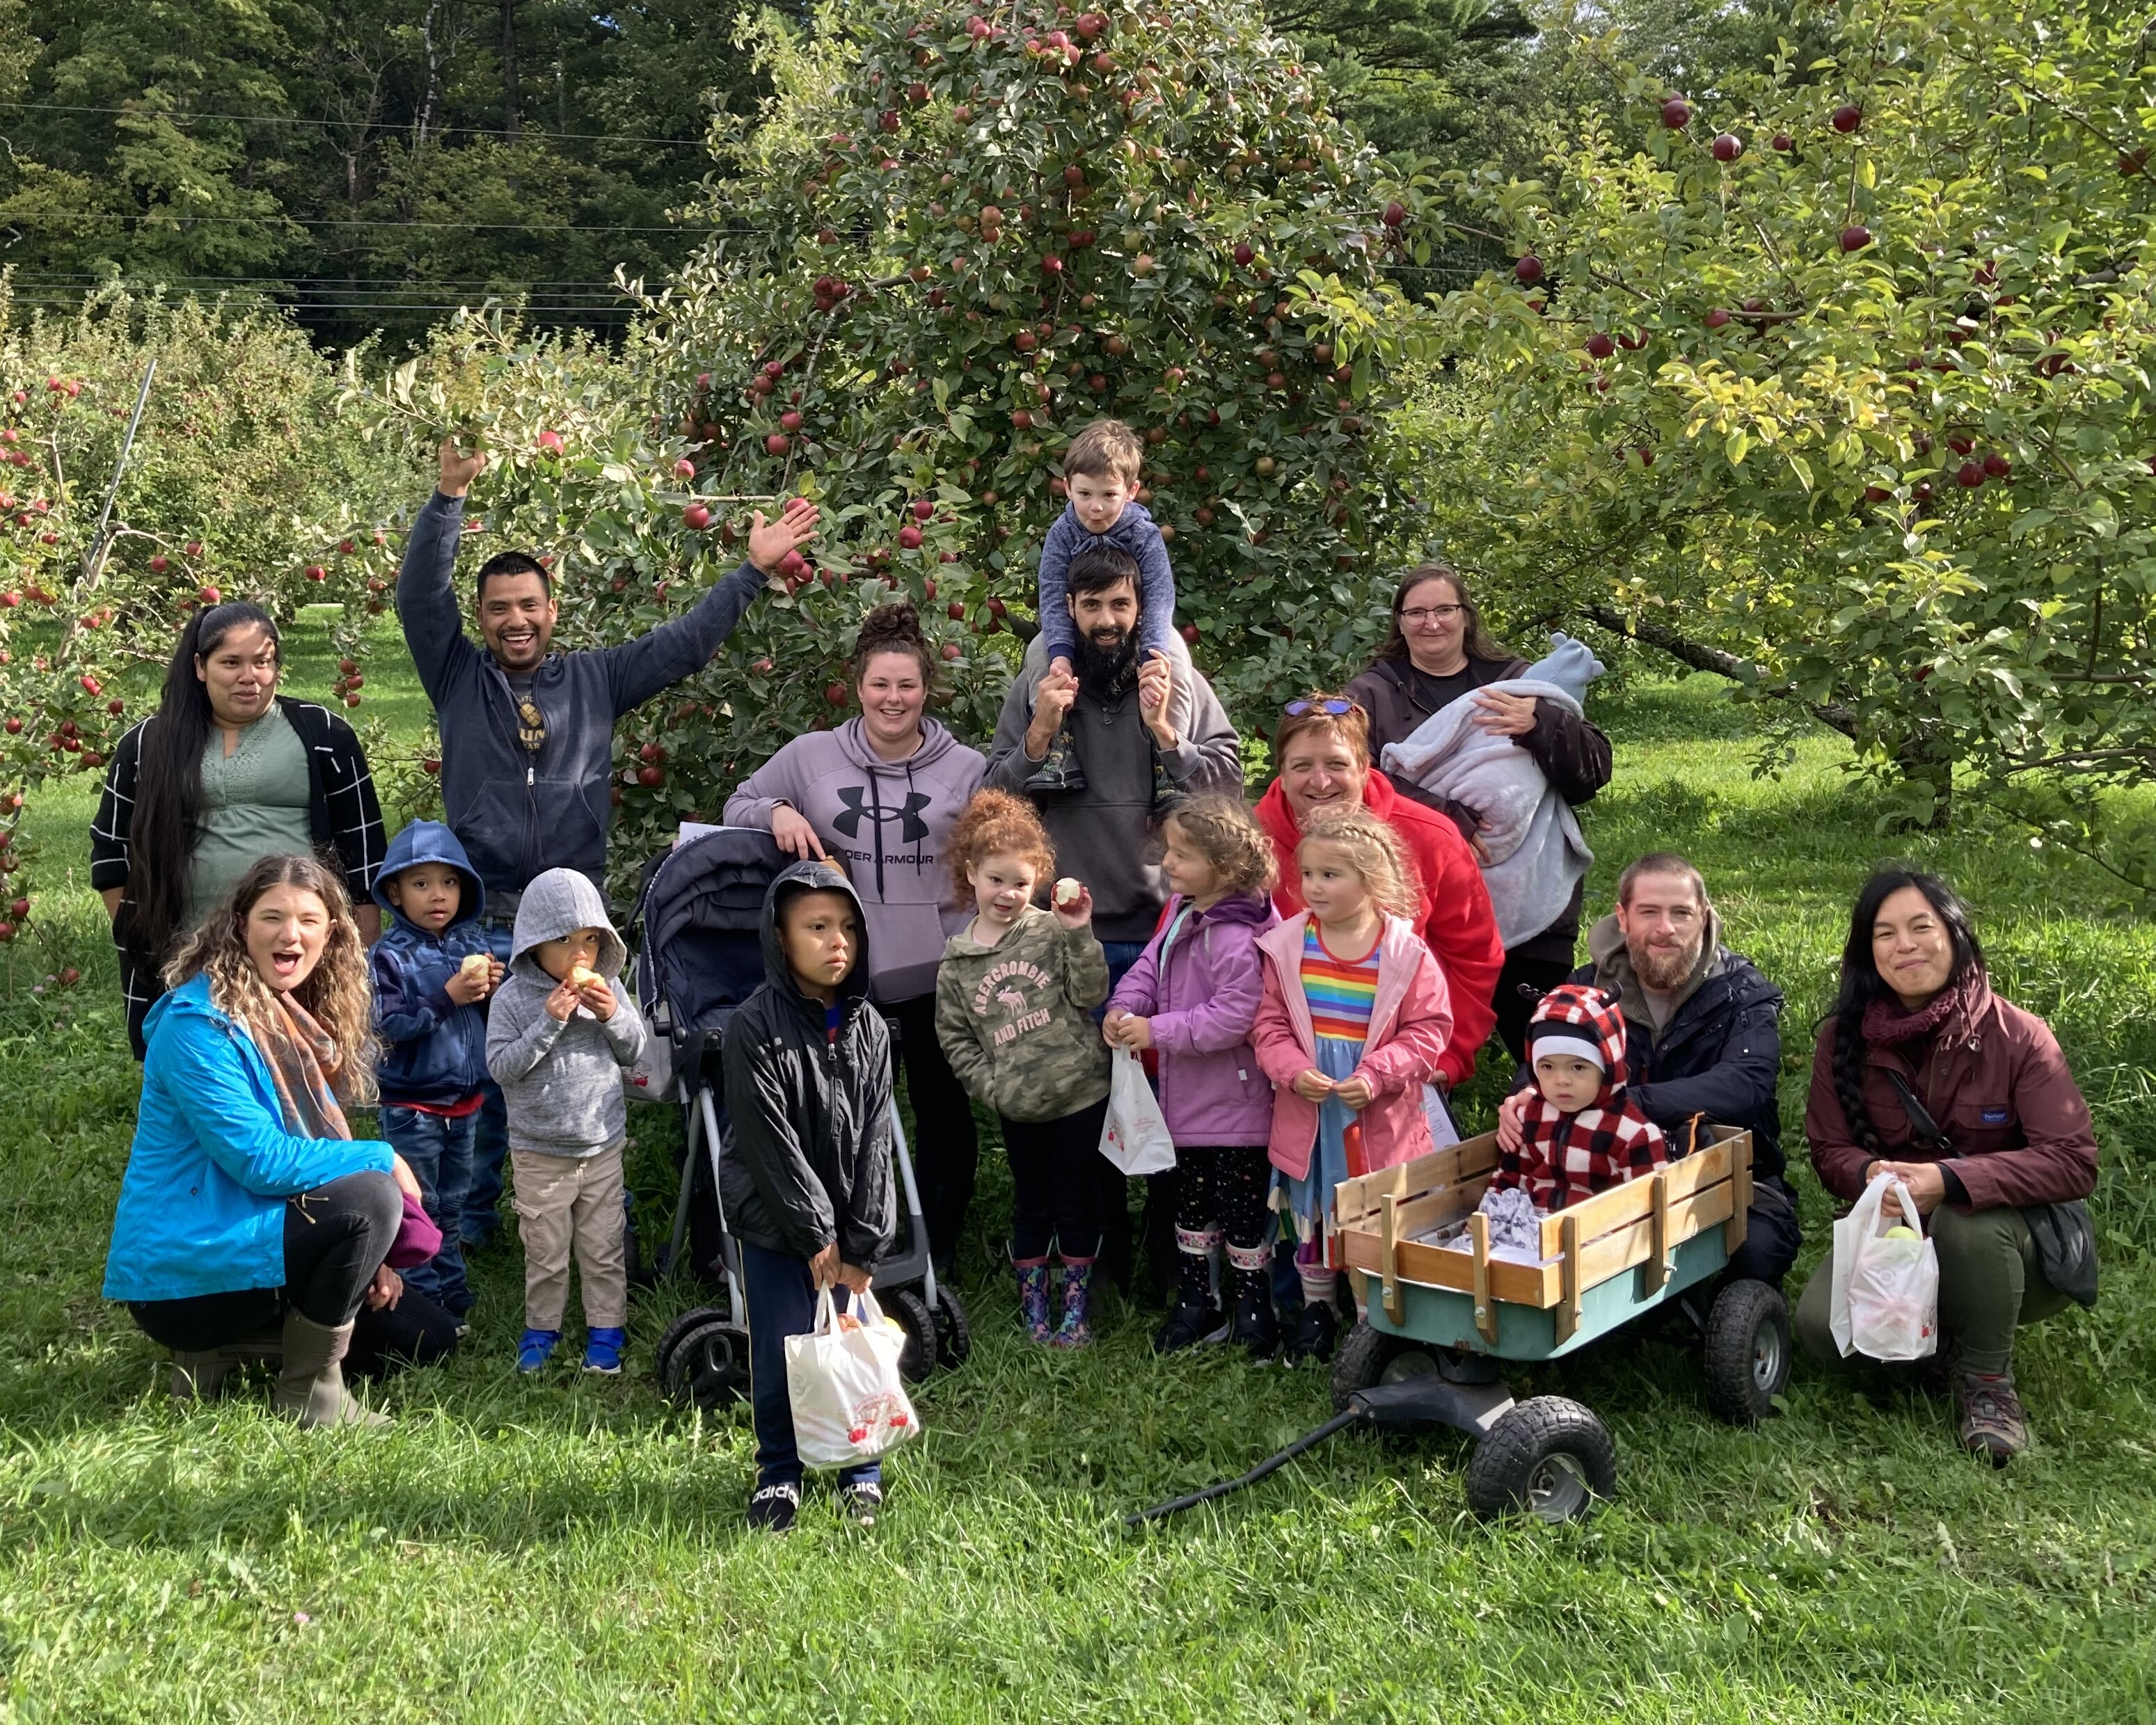 Children and families apple picking